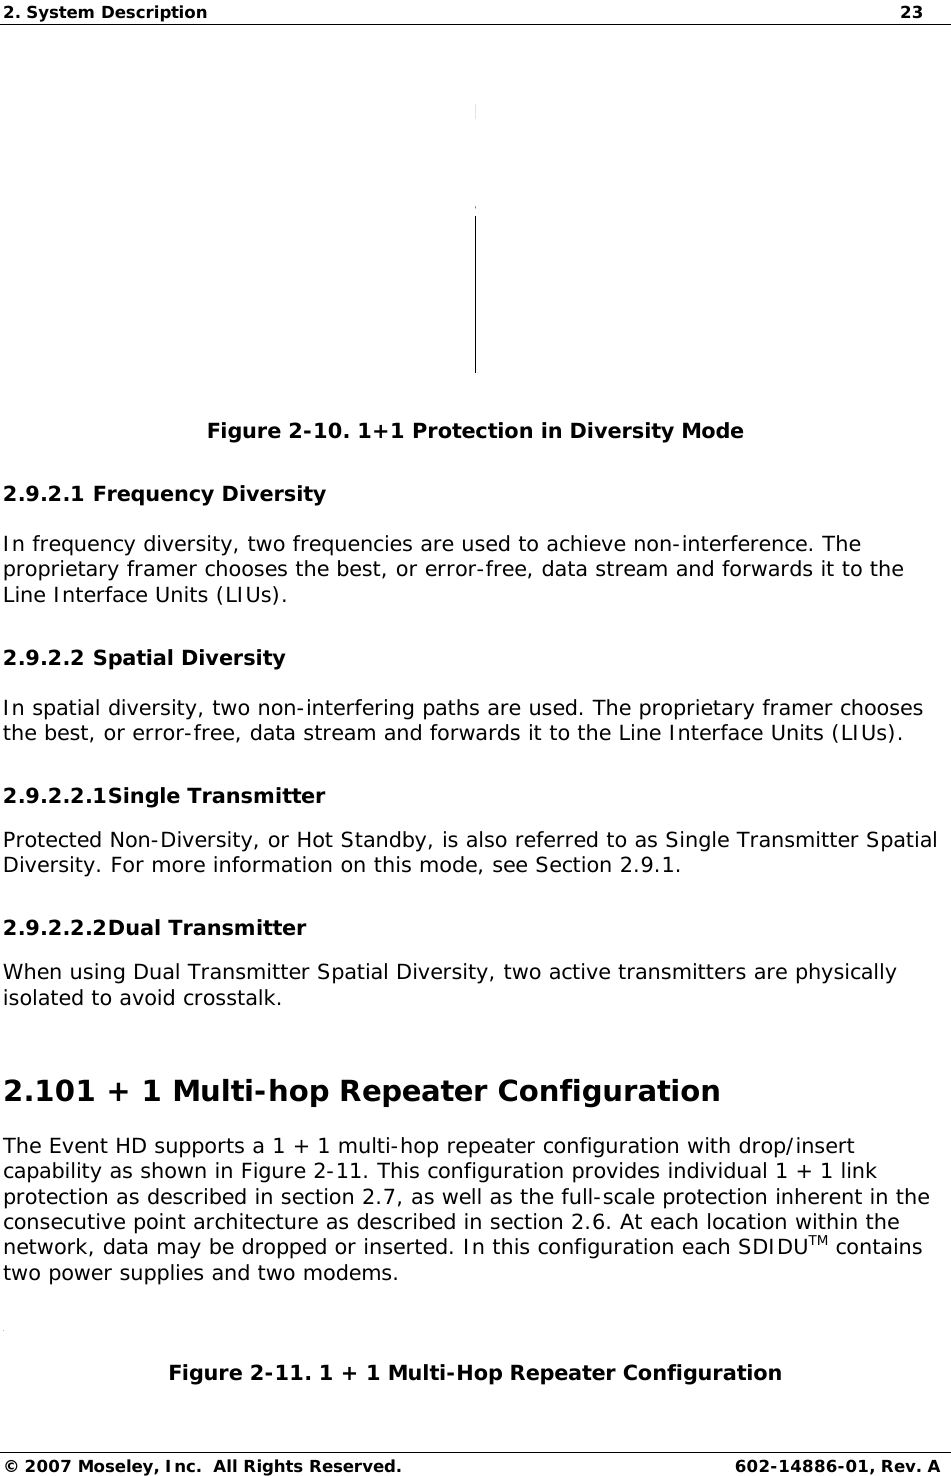 2. System Description  23 © 2007 Moseley, Inc.  All Rights Reserved. 602-14886-01, Rev. A  w Figure 2-10. 1+1 Protection in Diversity Mode 2.9.2.1 Frequency Diversity In frequency diversity, two frequencies are used to achieve non-interference. The proprietary framer chooses the best, or error-free, data stream and forwards it to the Line Interface Units (LIUs). 2.9.2.2 Spatial Diversity In spatial diversity, two non-interfering paths are used. The proprietary framer chooses the best, or error-free, data stream and forwards it to the Line Interface Units (LIUs). 2.9.2.2.1 Single Transmitter Protected Non-Diversity, or Hot Standby, is also referred to as Single Transmitter Spatial Diversity. For more information on this mode, see Section 2.9.1. 2.9.2.2.2 Dual Transmitter When using Dual Transmitter Spatial Diversity, two active transmitters are physically isolated to avoid crosstalk. 2.101 + 1 Multi-hop Repeater Configuration The Event HD supports a 1 + 1 multi-hop repeater configuration with drop/insert capability as shown in Figure 2-11. This configuration provides individual 1 + 1 link protection as described in section 2.7, as well as the full-scale protection inherent in the consecutive point architecture as described in section 2.6. At each location within the network, data may be dropped or inserted. In this configuration each SDIDUTM contains two power supplies and two modems.  Figure 2-11. 1 + 1 Multi-Hop Repeater Configuration 